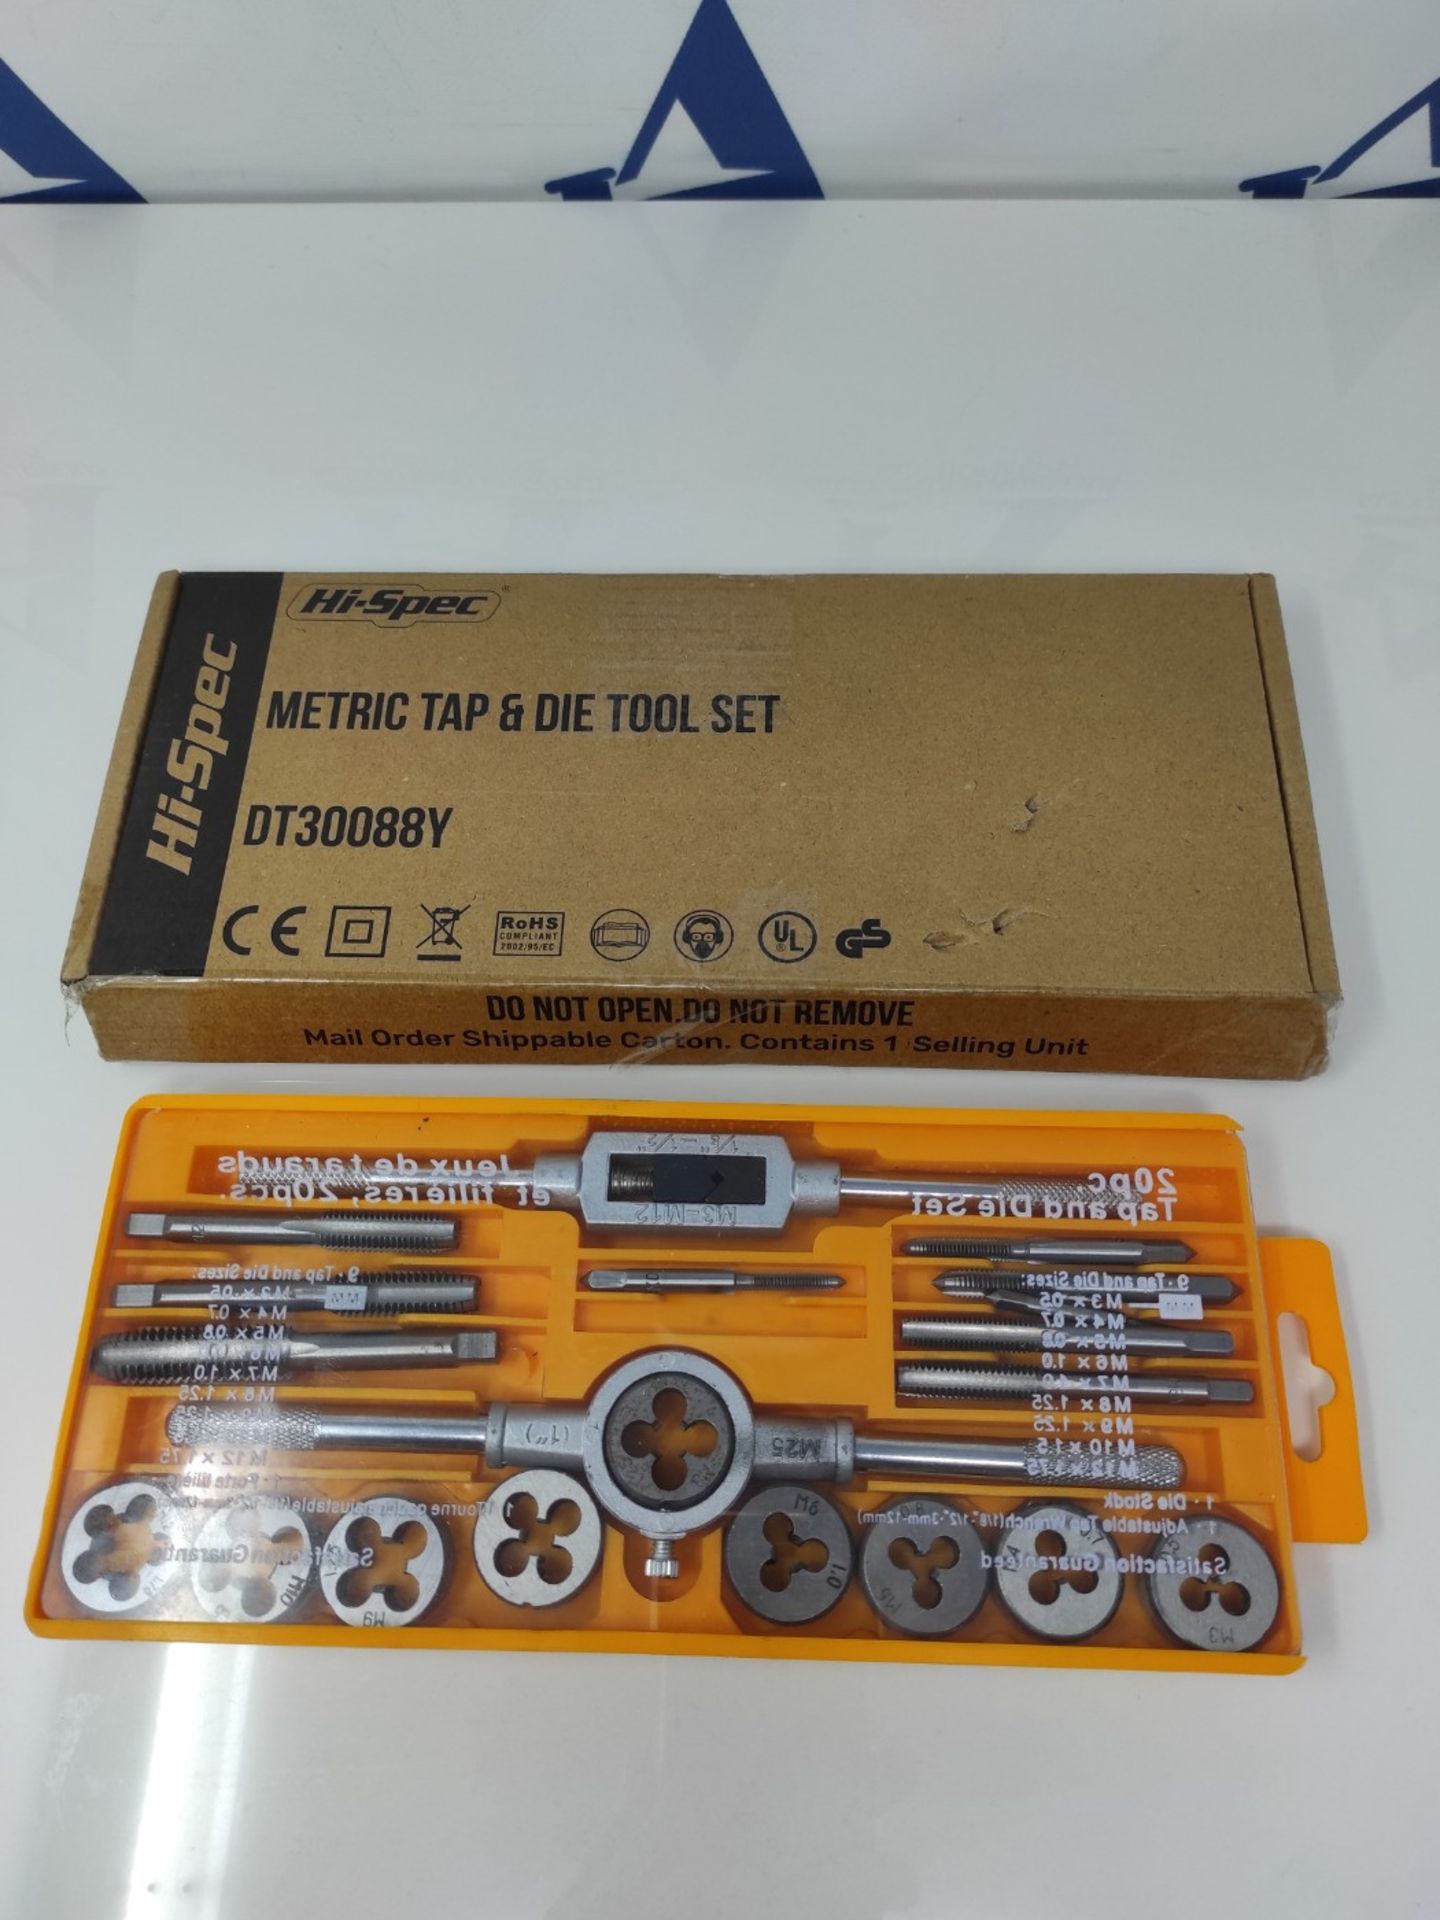 Hi-Spec 20pc Metric Tap & Die Set. Complete M3 to M12 Tapping and Threading Tools with